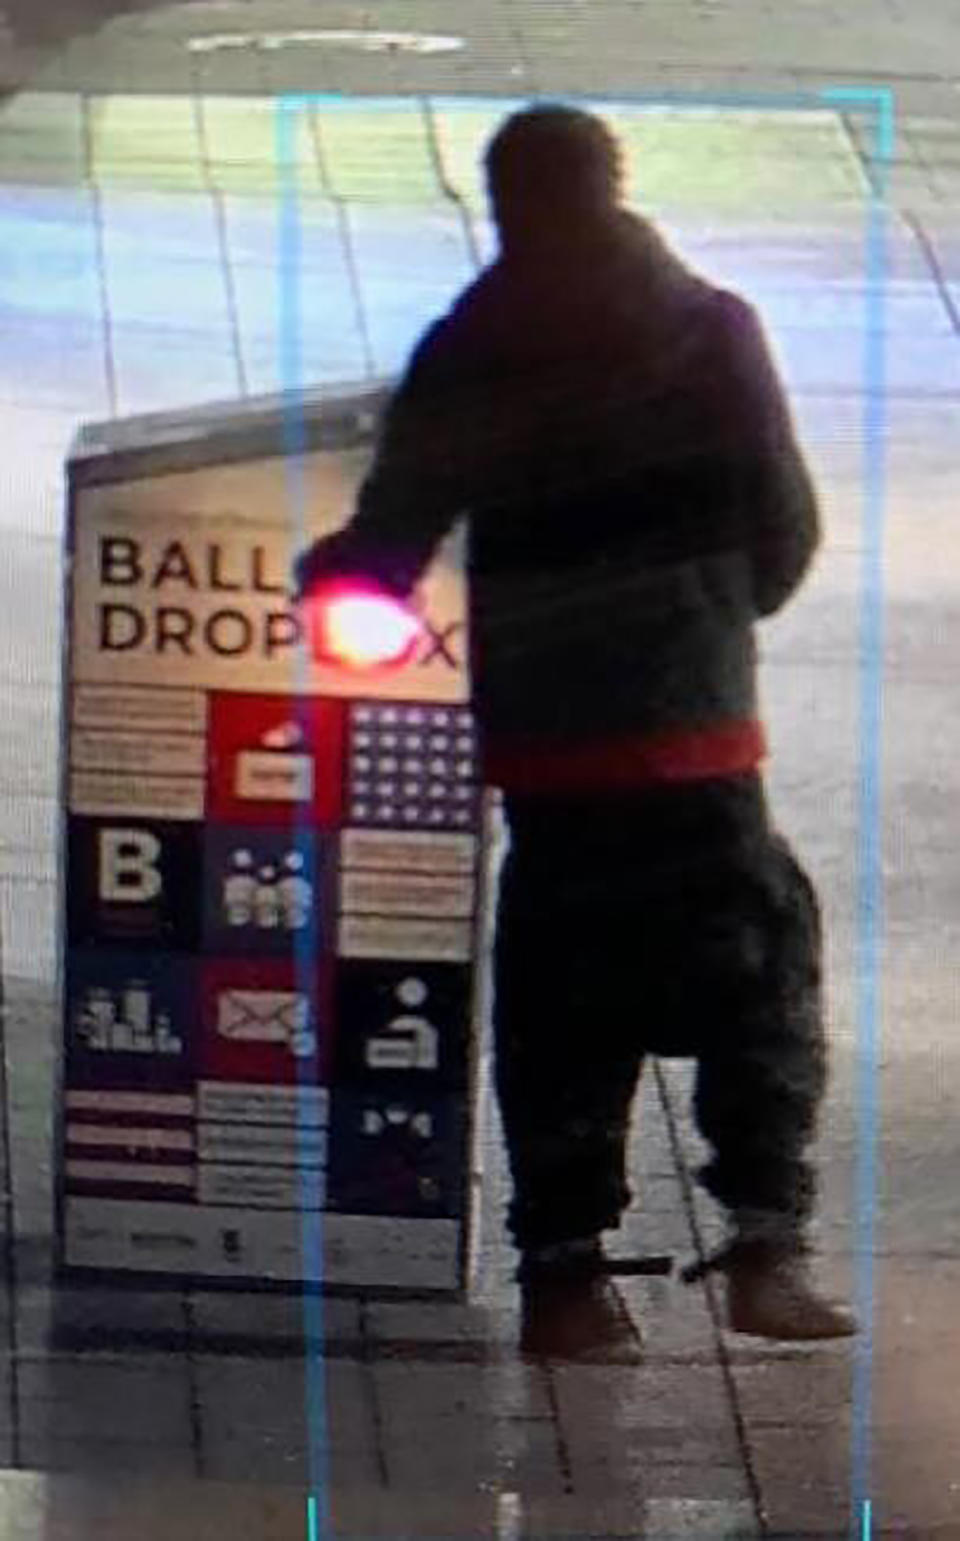 This surveillance image provided by the Boston Police Department shows a man approaching a ballot drop box outside the Boston Public Library, early Sunday, Oct. 25, 2020, in downtown Boston. Massachusetts election officials say a fire was set at the ballot drop box holding more than 120 ballots in what appears to have been a “deliberate attack." Boston Police say that an arson investigation is underway and the person shown in this surveillance image is a person of interest. (Courtesy of Boston Police Department via AP)